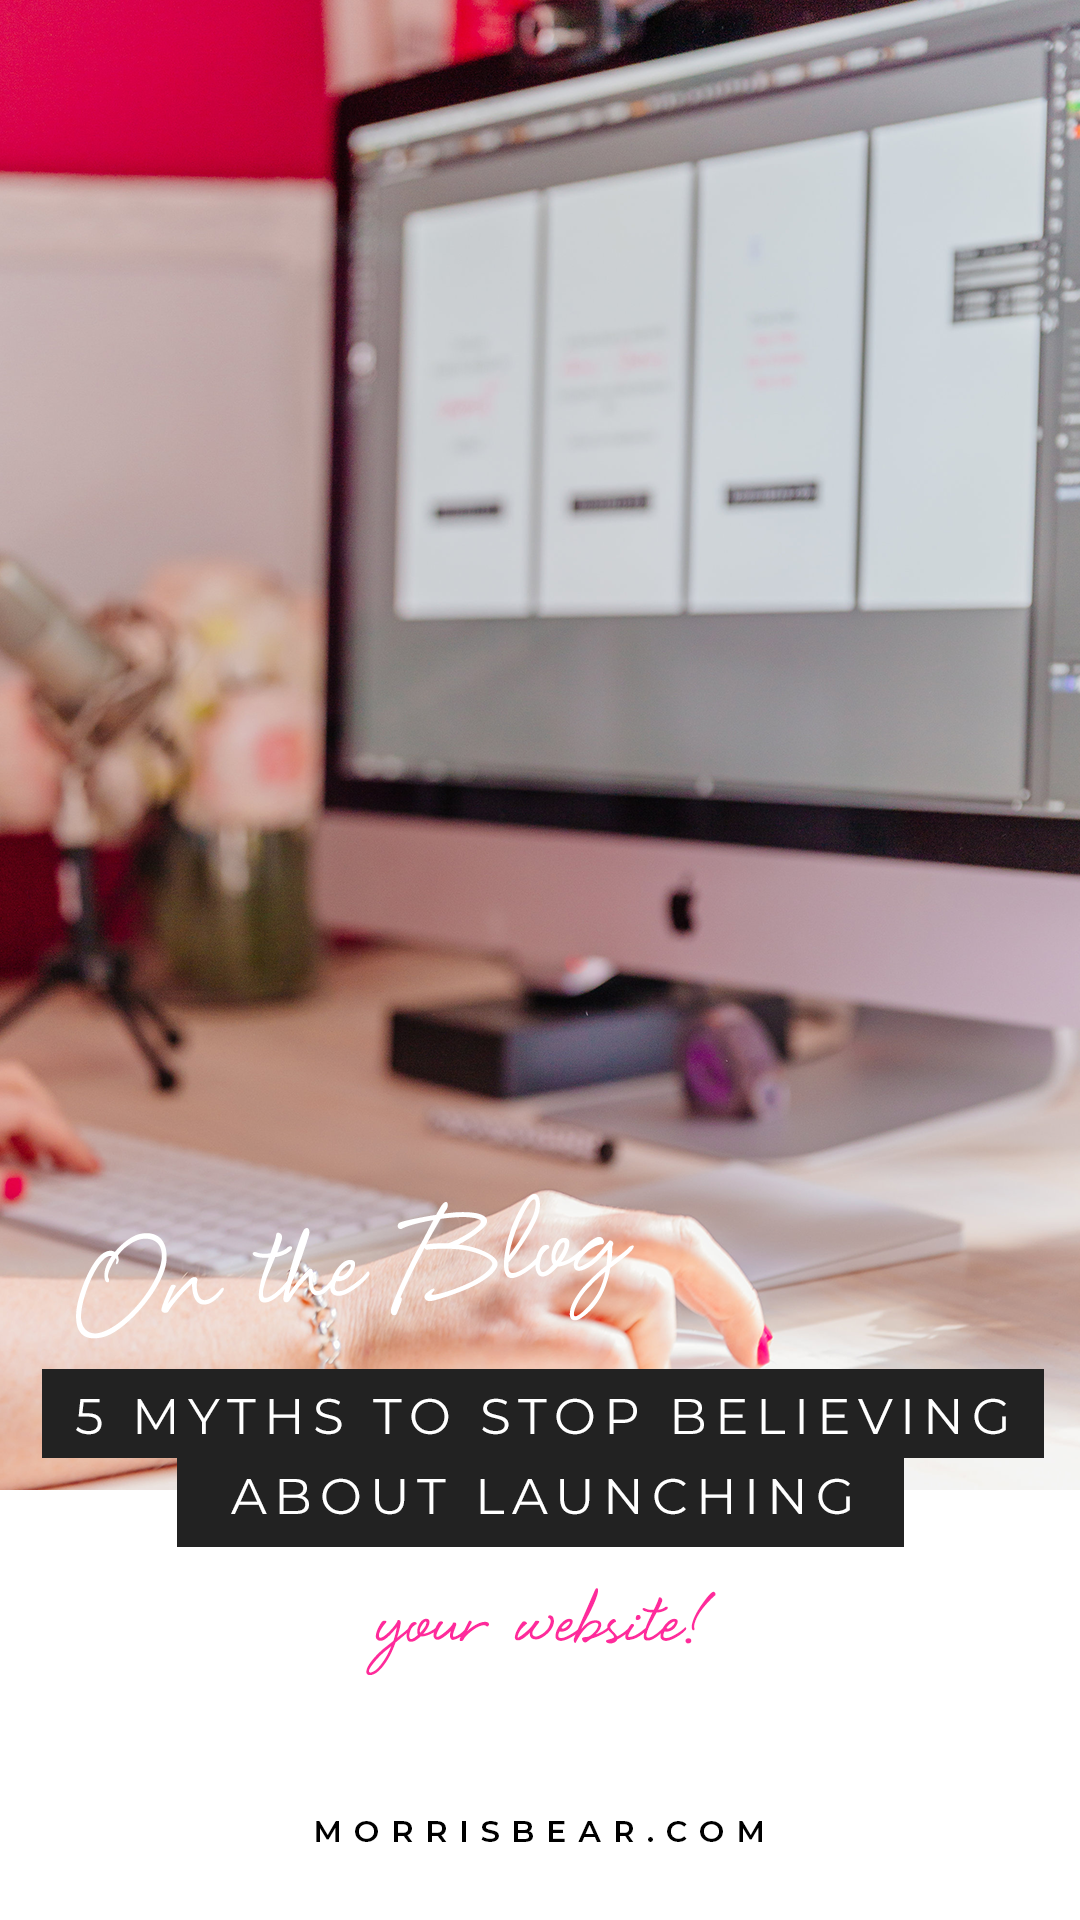 5 Myths to Stop Believing about Launching Your Website